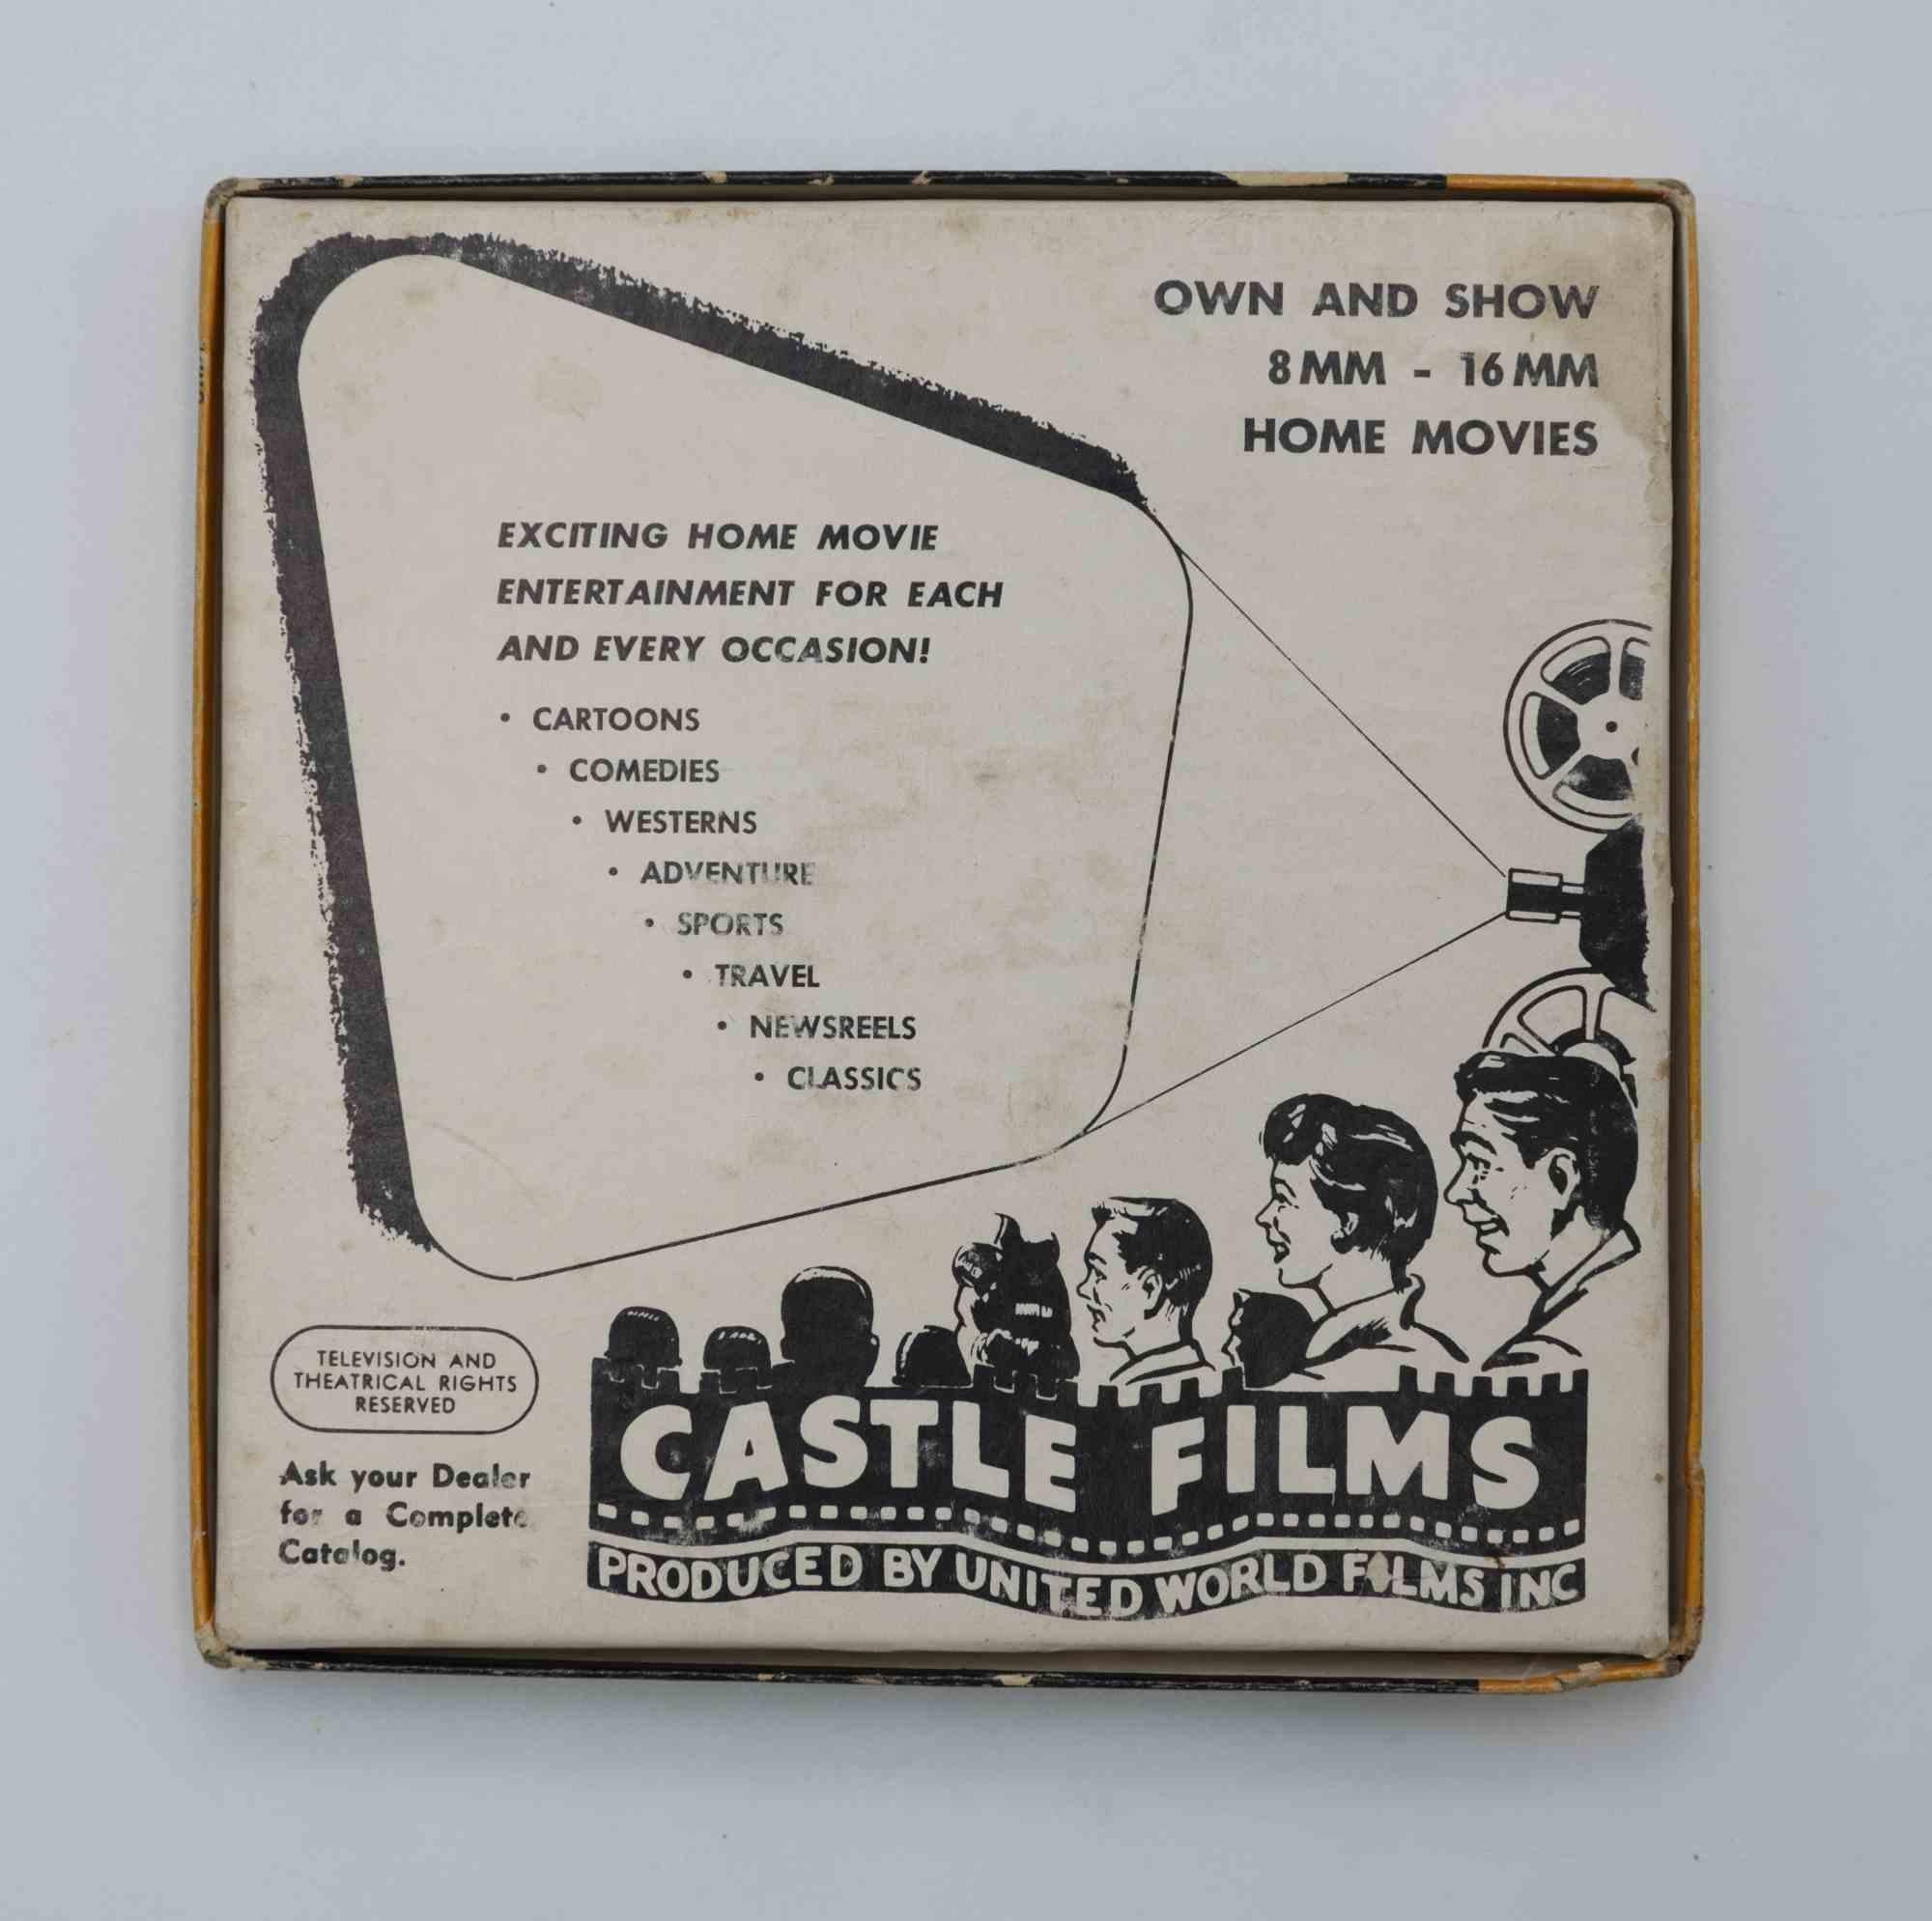 New Parade is an original film from the 1940s.

It includes original packaging.

8mm or 16mm.

Good conditions